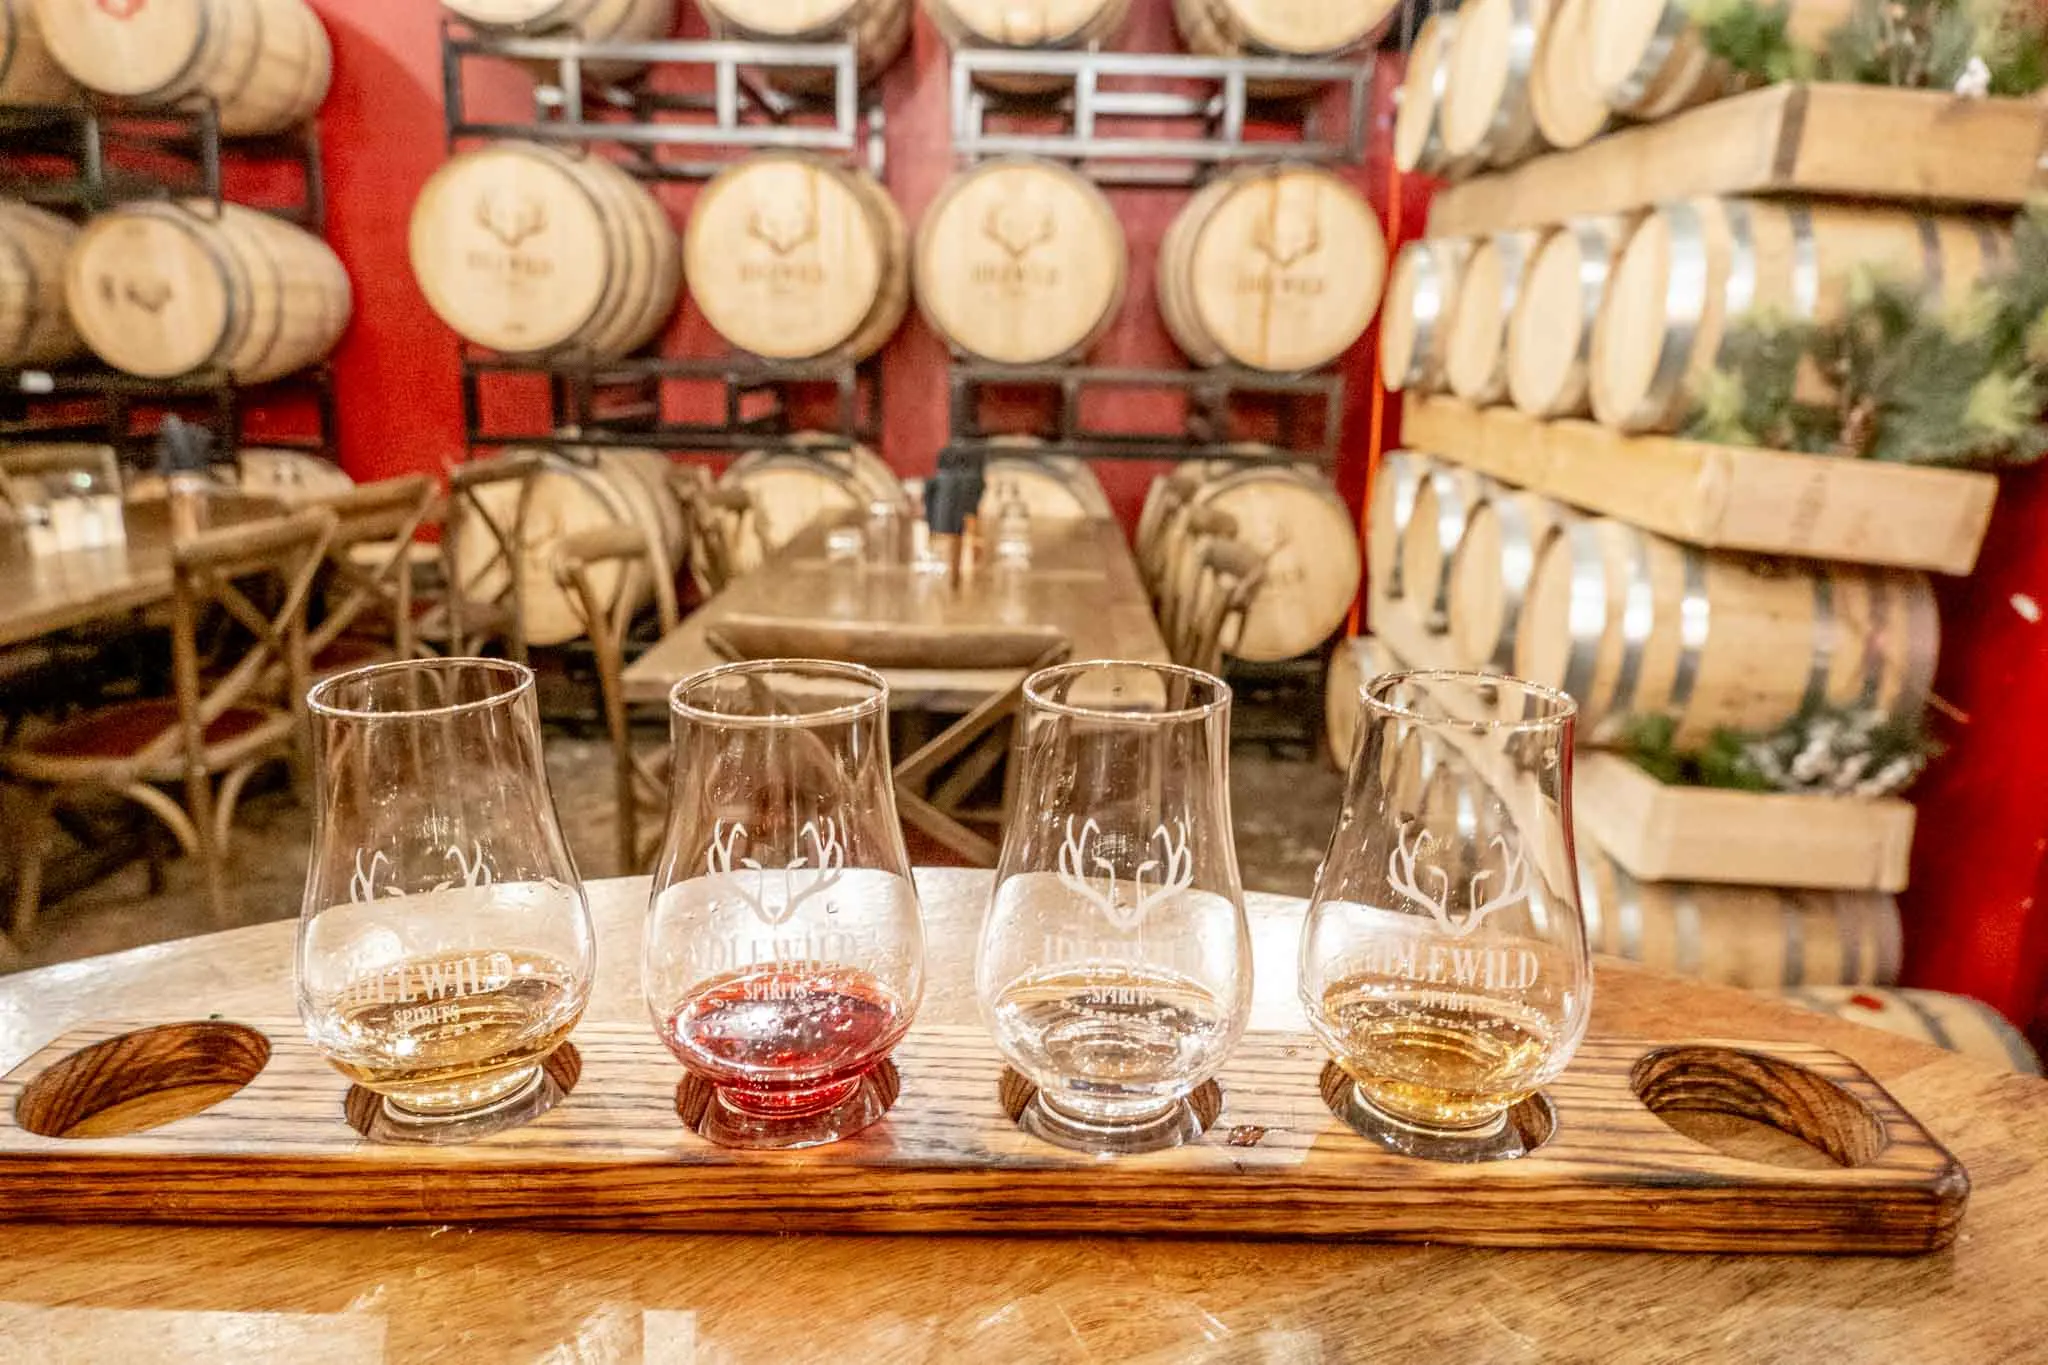 Tasting flight in a room filled with barrels